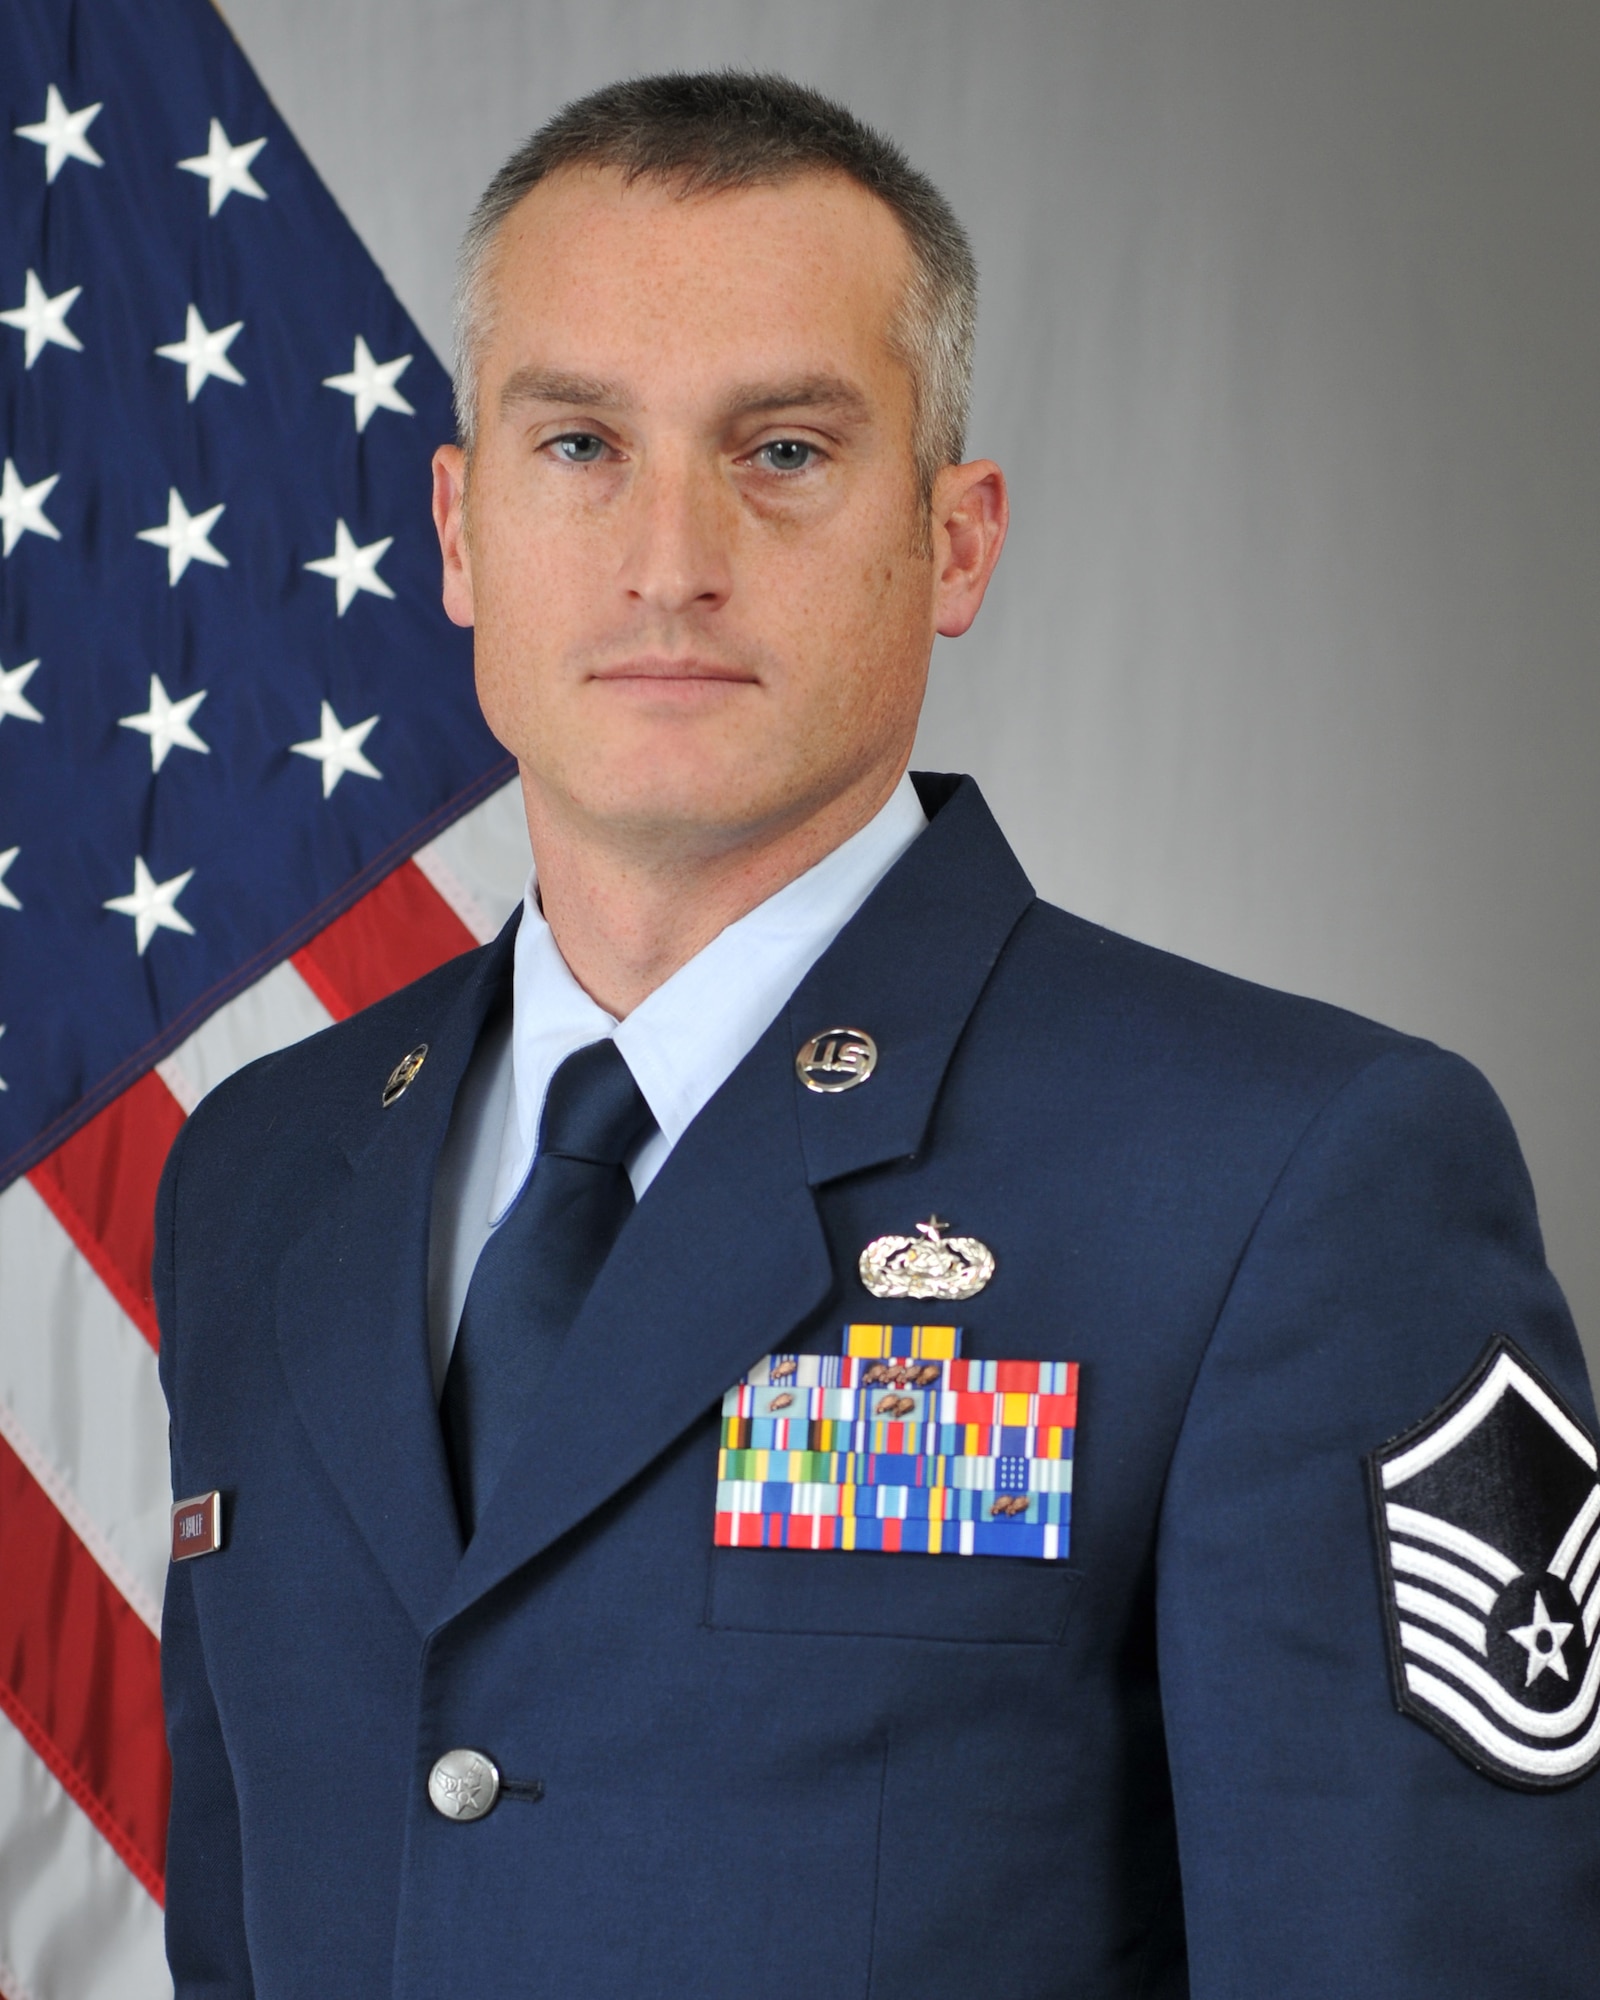 Master Sgt. Scott Schuler, the Mission Systems Support Superintendent with the 133rd Test Squadron in Fort Dodge, Iowa, has been selected as the 2018 Non-Commissioned Officer of the Year for the 185th Air Refueling Wing. Schuler will compete at the state level for a chance to go on to state completion. Official Photo by Senior Master Sgt. Vince De Groot.